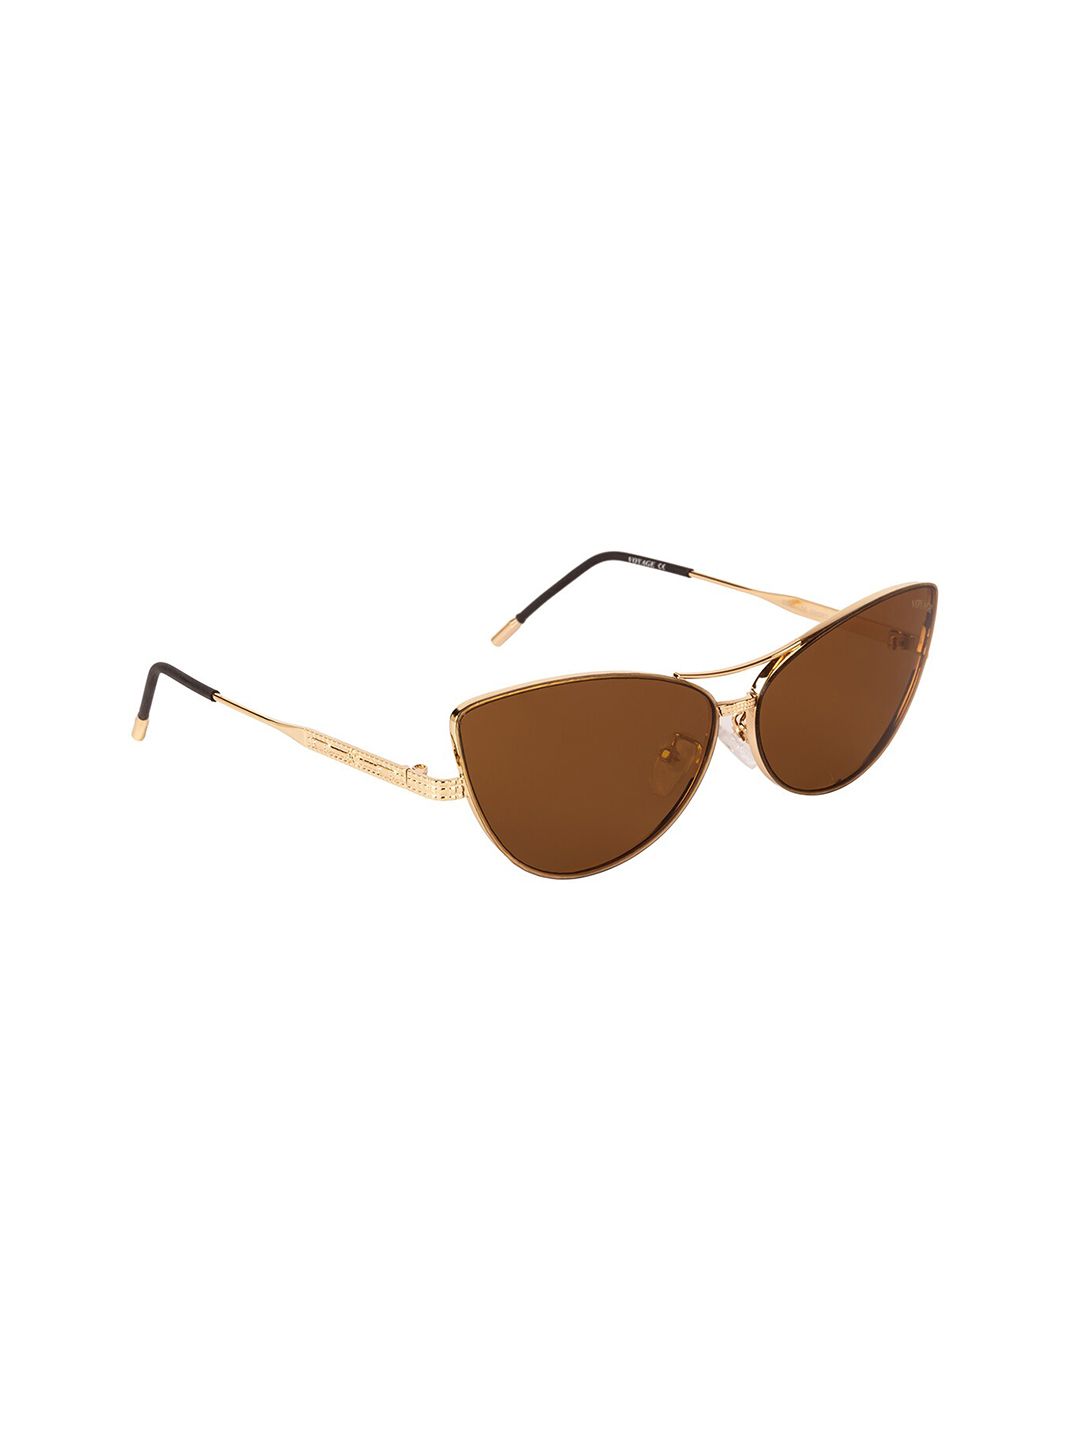 Voyage Women Brown Lens & Gold-Toned Cateye Sunglasses with UV Protected Lens Price in India